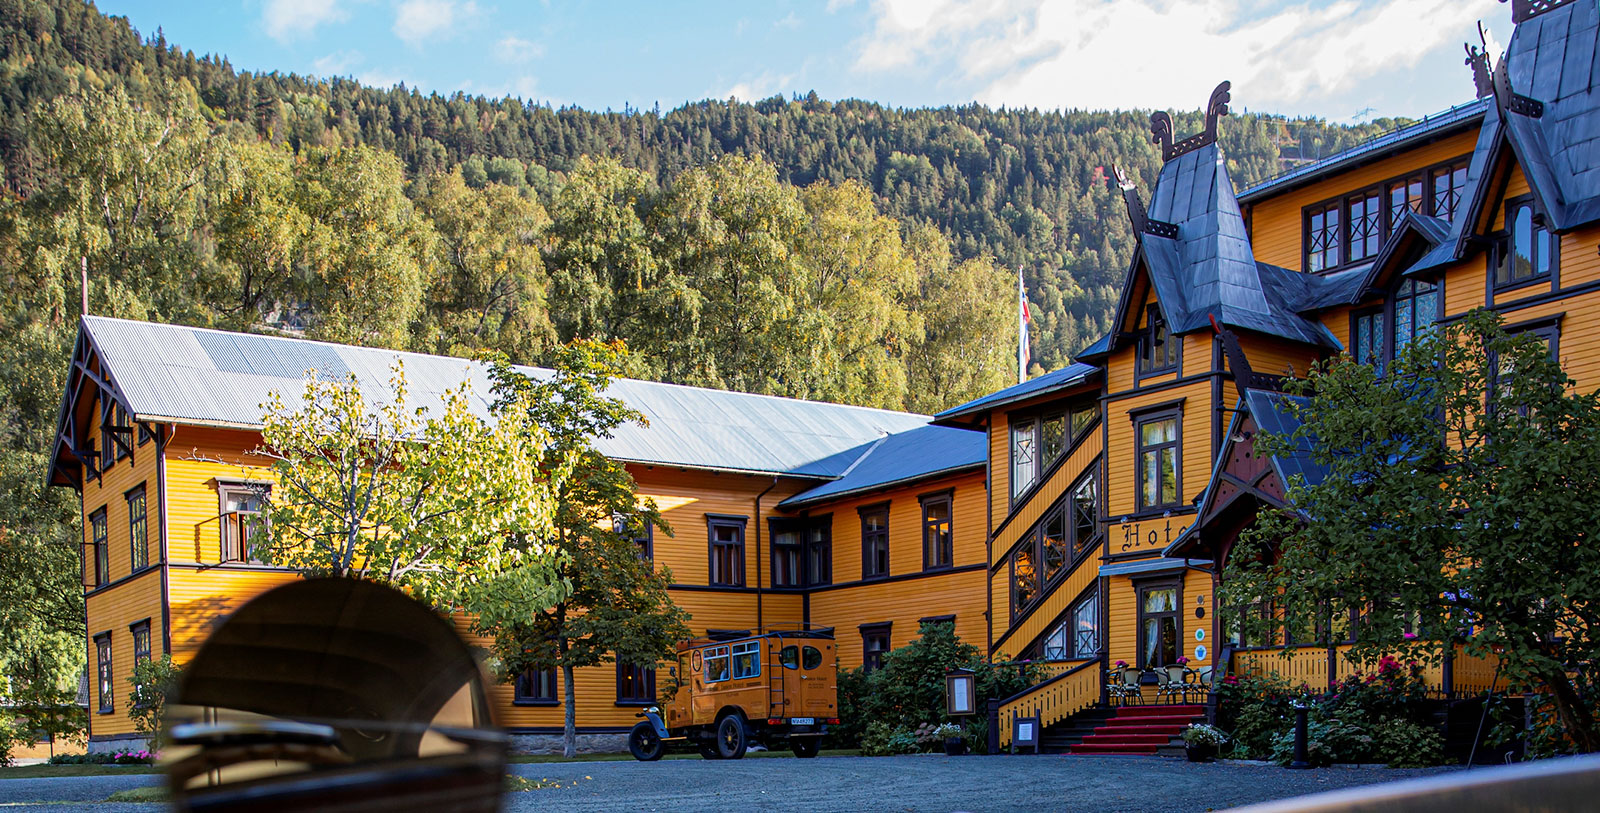 Image of hotel exterior Dalen Hotel, 1894, Member of Historic Hotels Worldwide, in Dalen, Norway, Overview